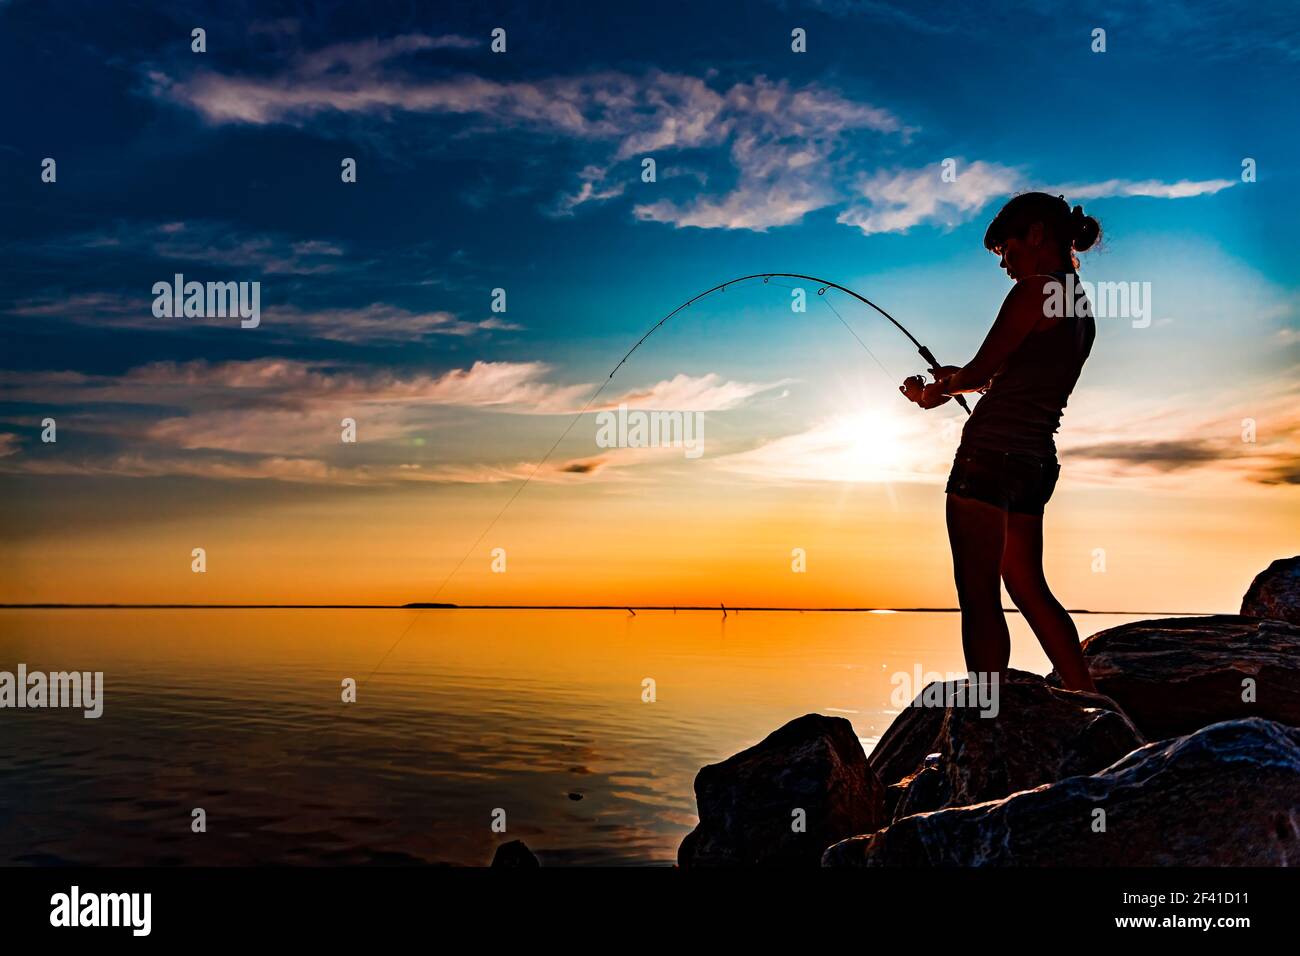 https://c8.alamy.com/comp/2F41D11/woman-fishing-on-fishing-rod-spinning-in-norway-fishing-in-norway-is-a-way-to-embrace-the-local-lifestyle-countless-lakes-and-rivers-and-an-extensive-coastline-means-outstanding-opportunities-2F41D11.jpg